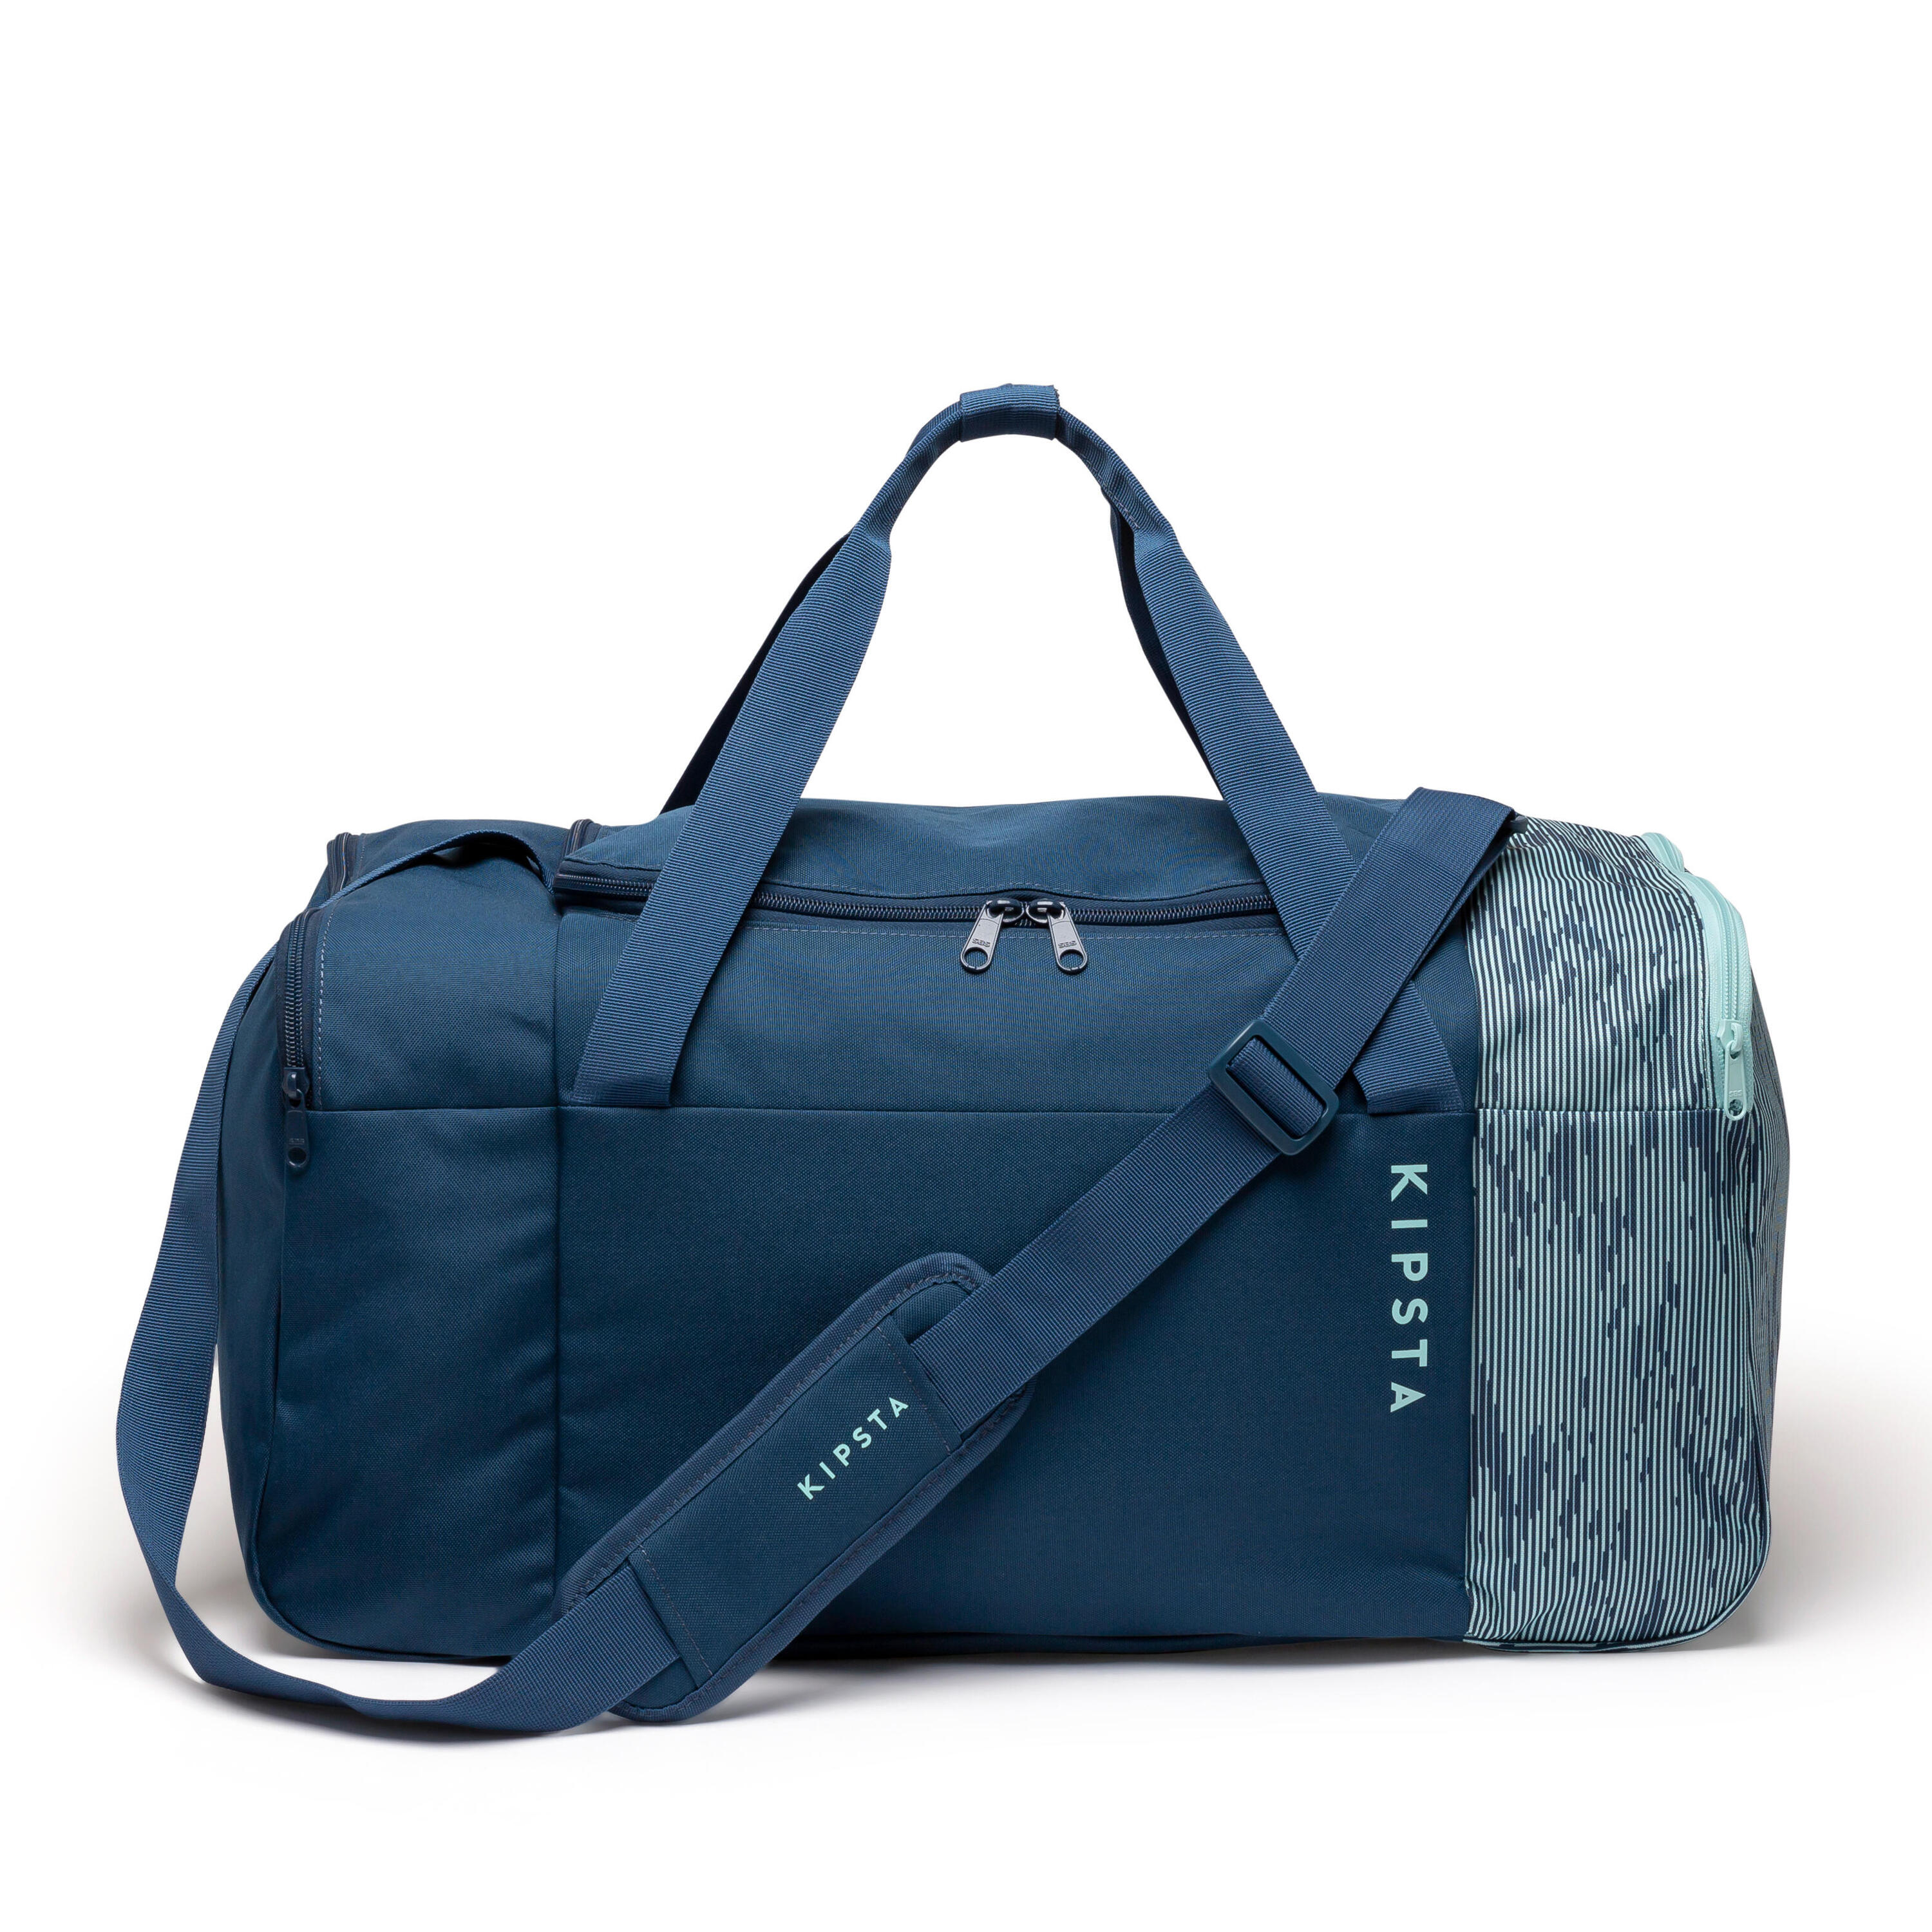 55L Sports Bag Essential - Turquoise 2/9